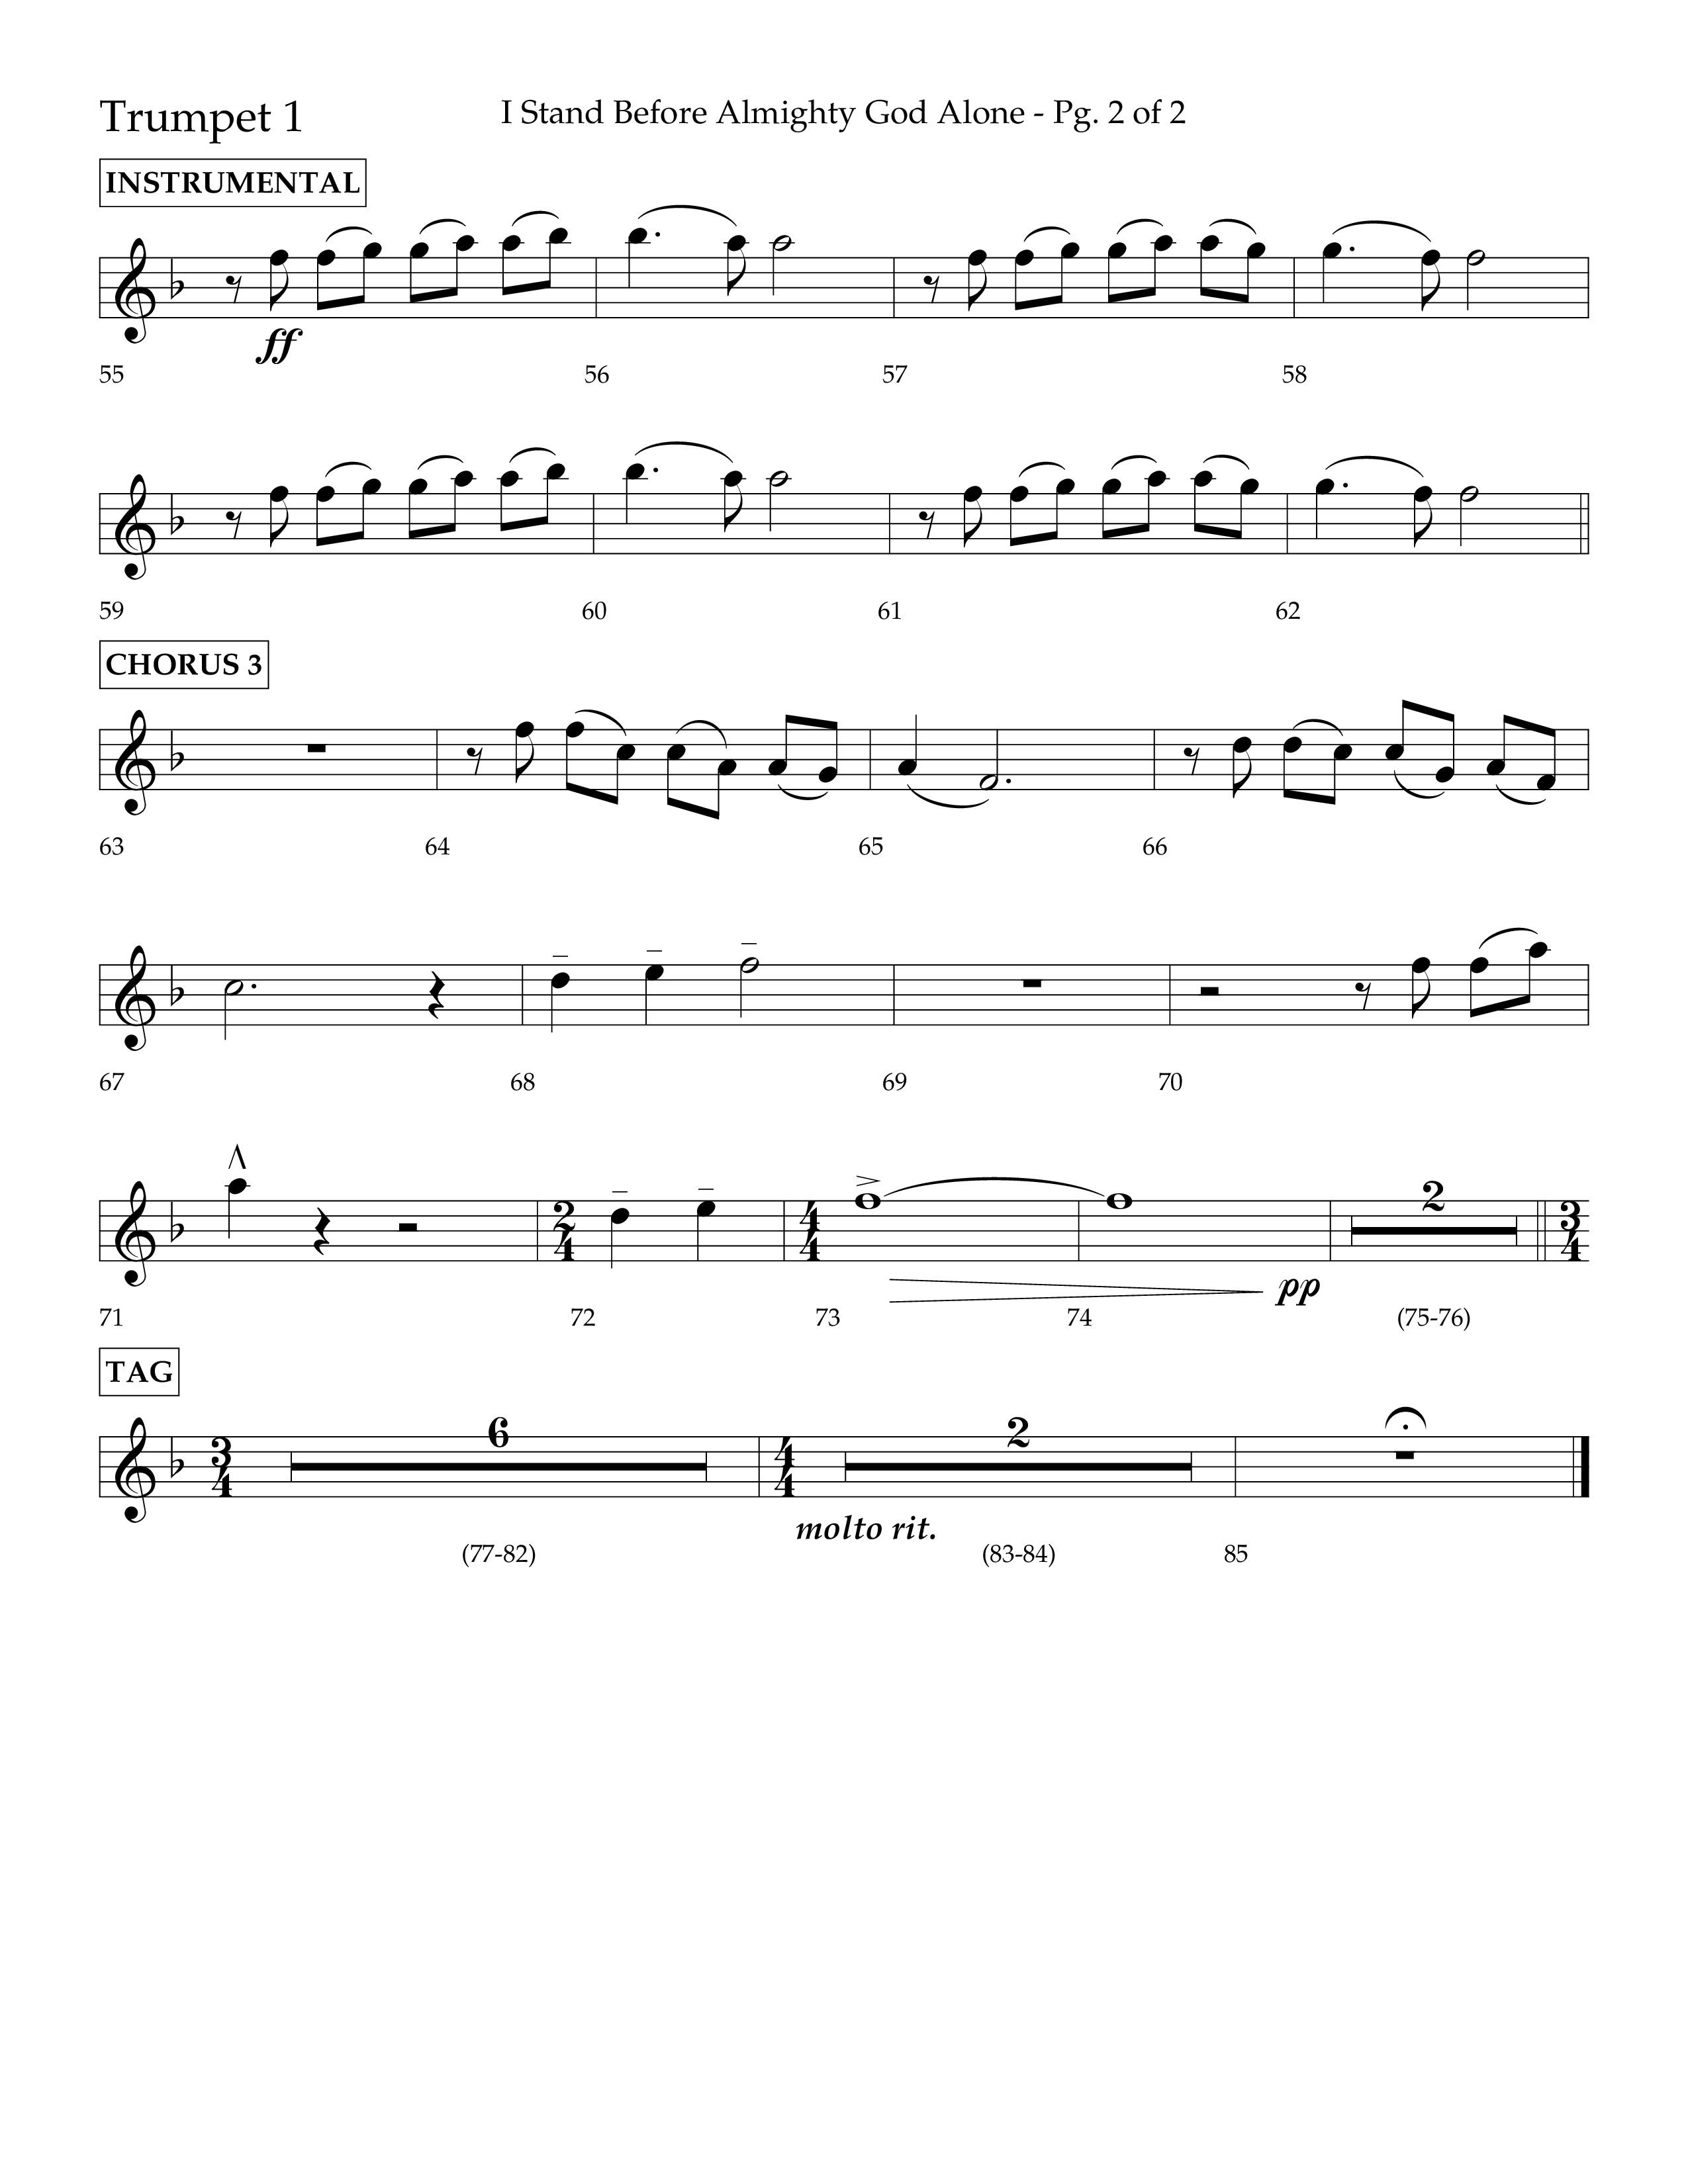 I Stand Before Almighty God Alone (Choral Anthem SATB) Trumpet 1 (Lifeway Choral / Arr. Craig Adams / Orch. Phillip Keveren)